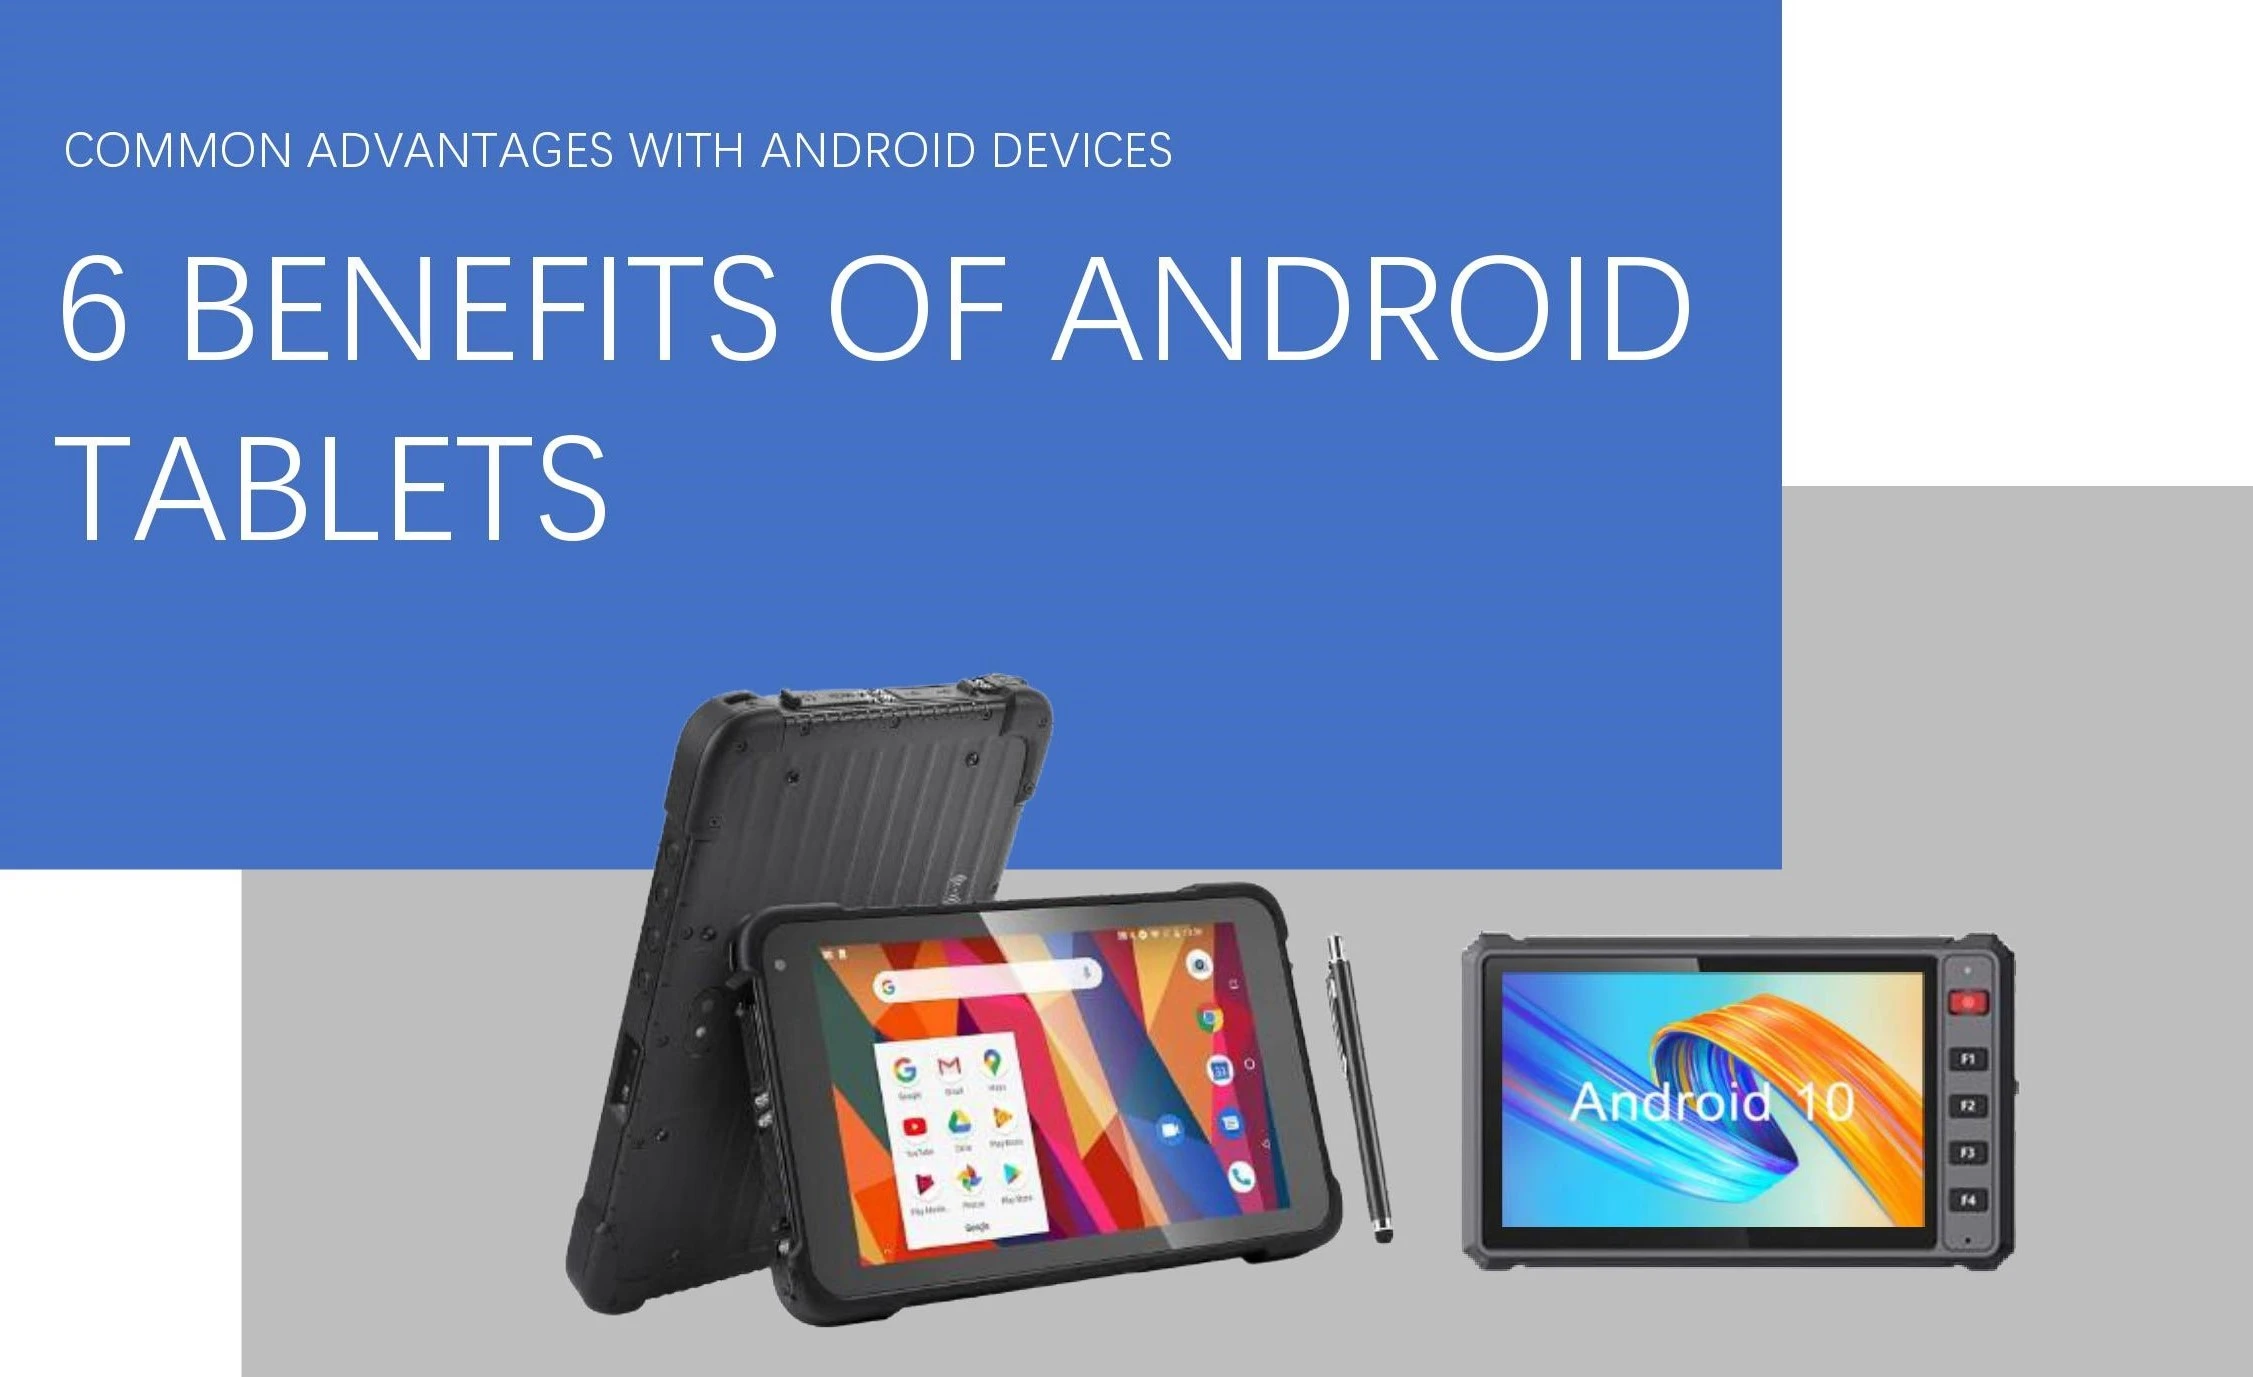 6 Benefits of Android Tablets